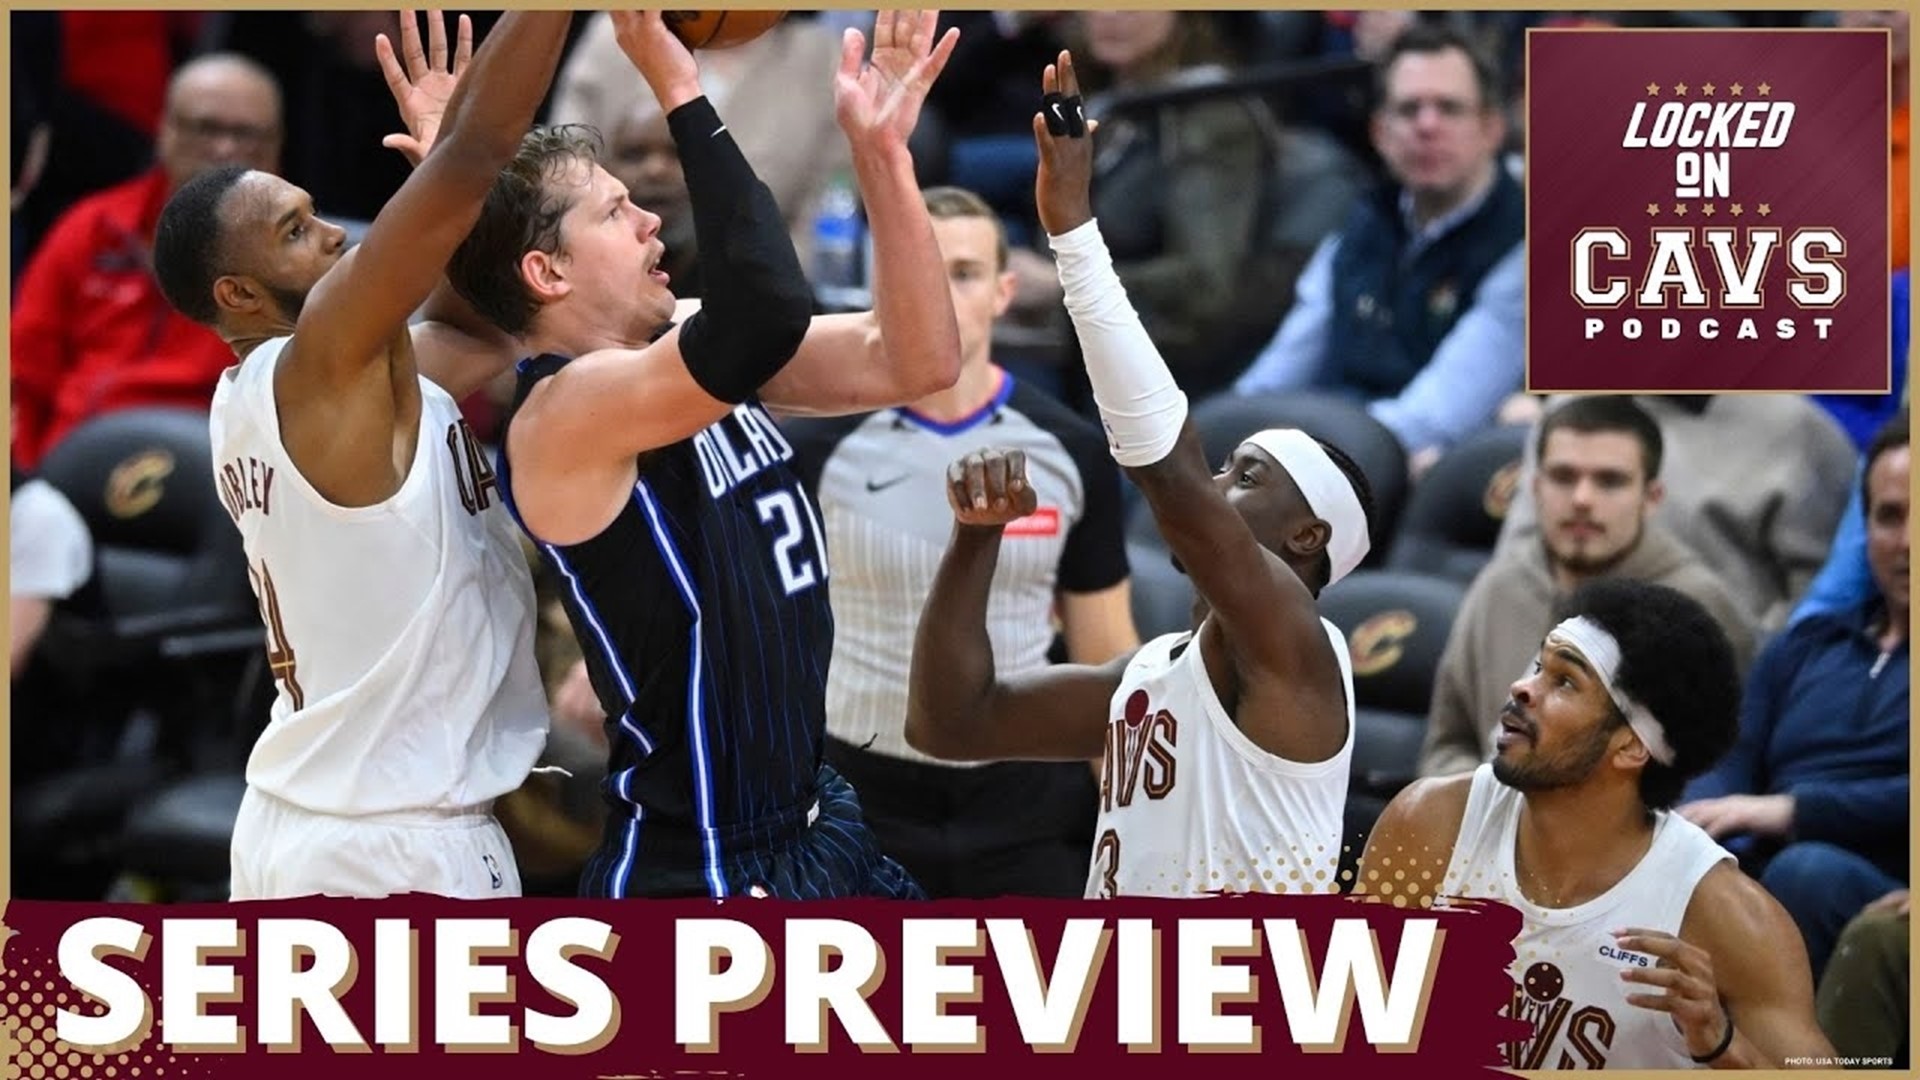 Locked On Cavs joins up with Locked On Magic to preview the Cavs-Magic series and look at each team's path to advancing.